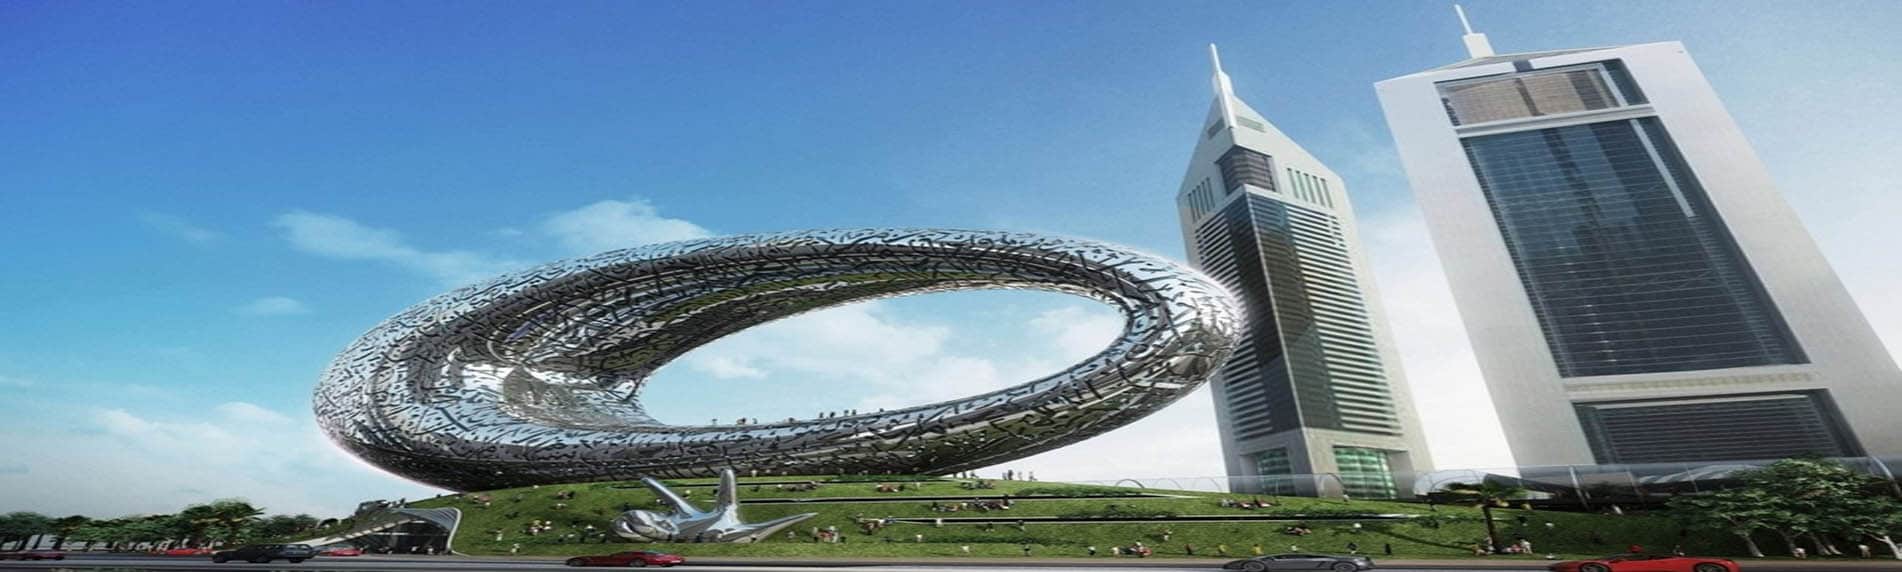 Museum of the Future Dubai Tickets and Offers